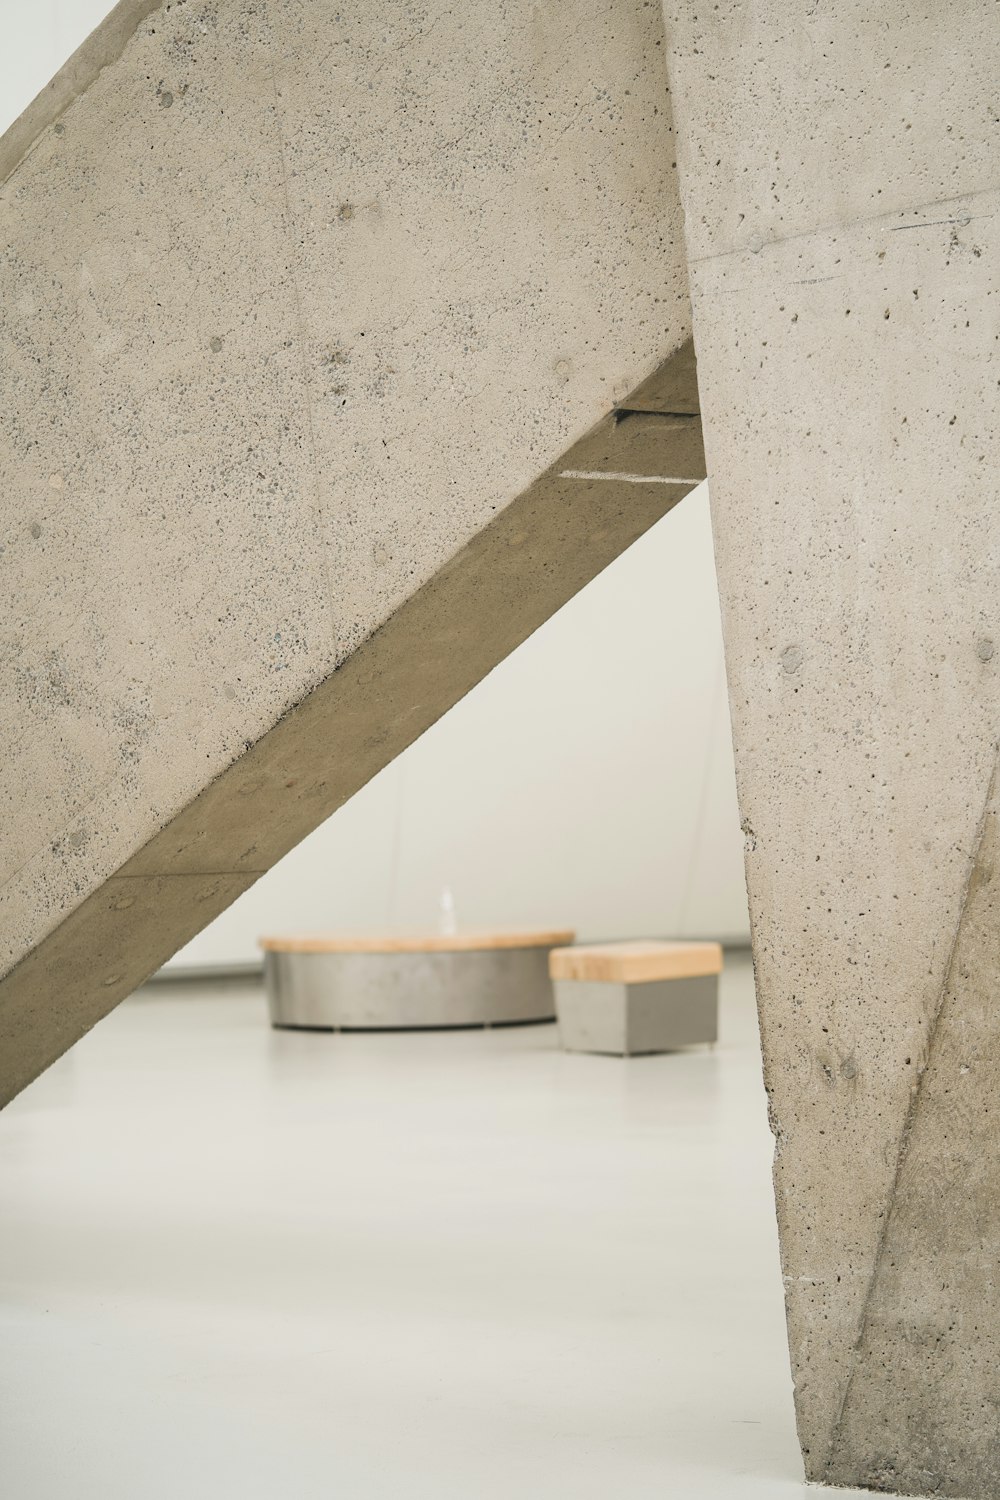 a concrete structure with a circular table underneath it